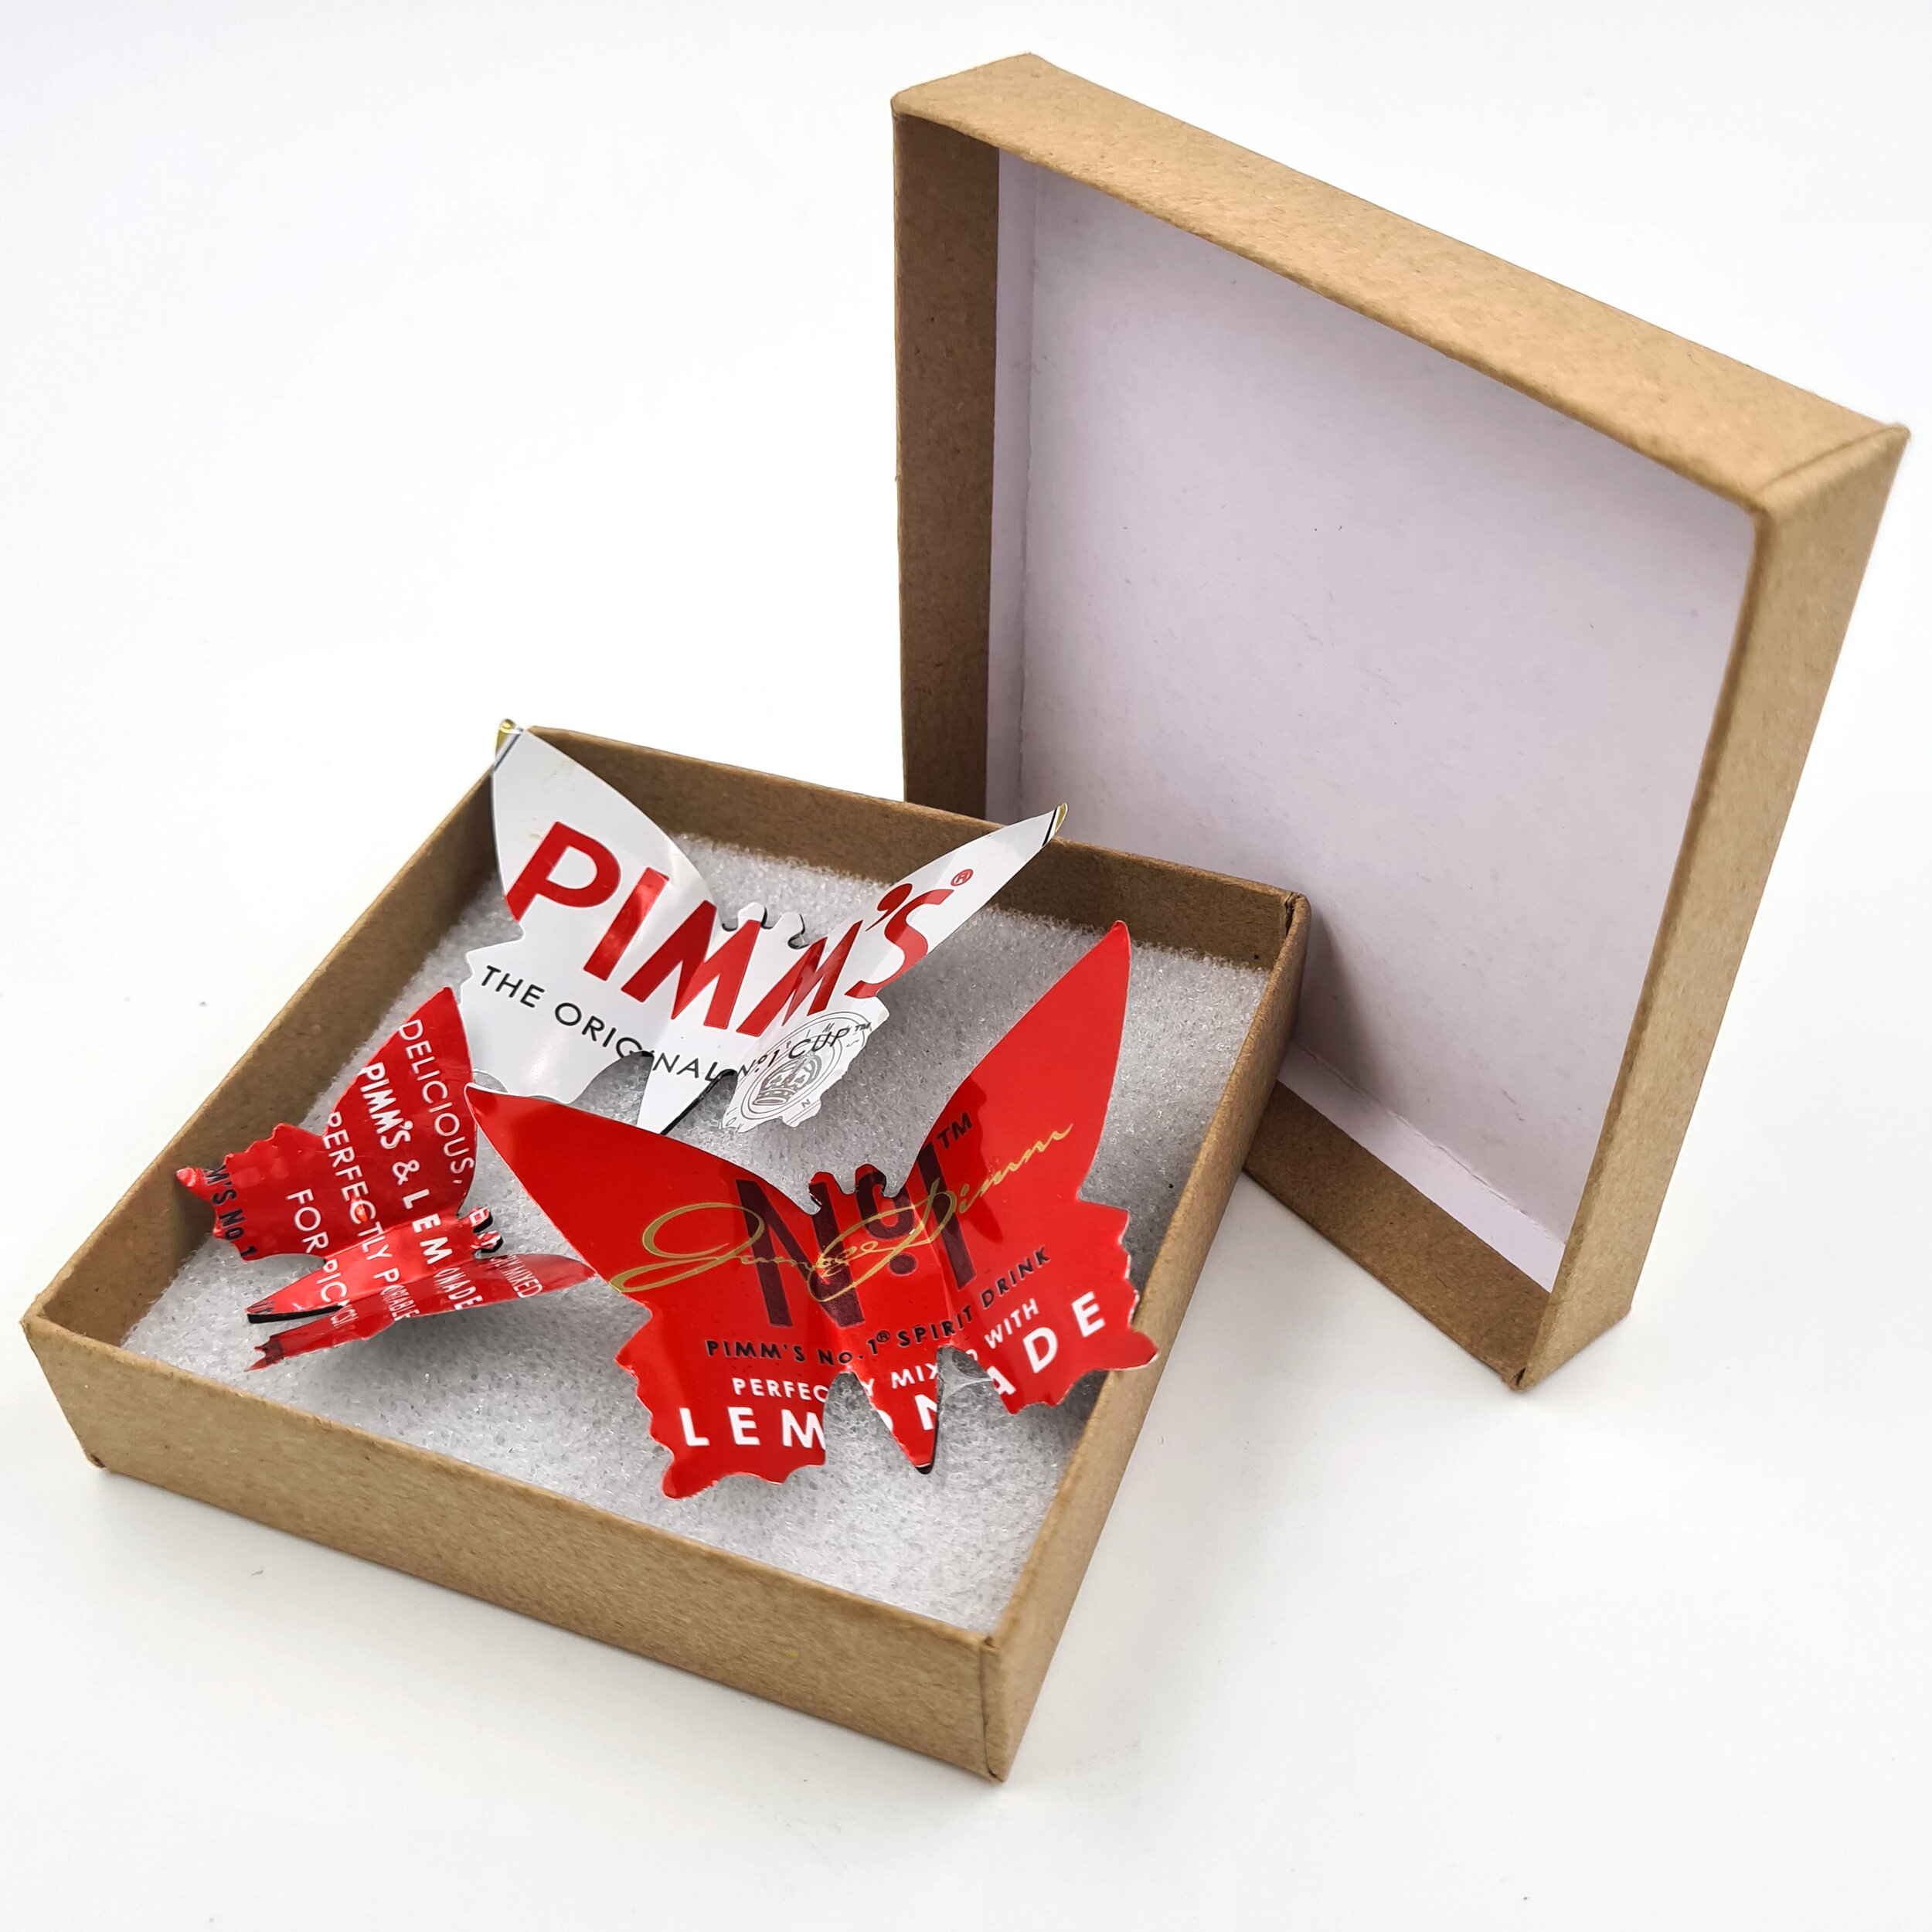 Pimm's red and white eco Butterfly Can Magnets in box